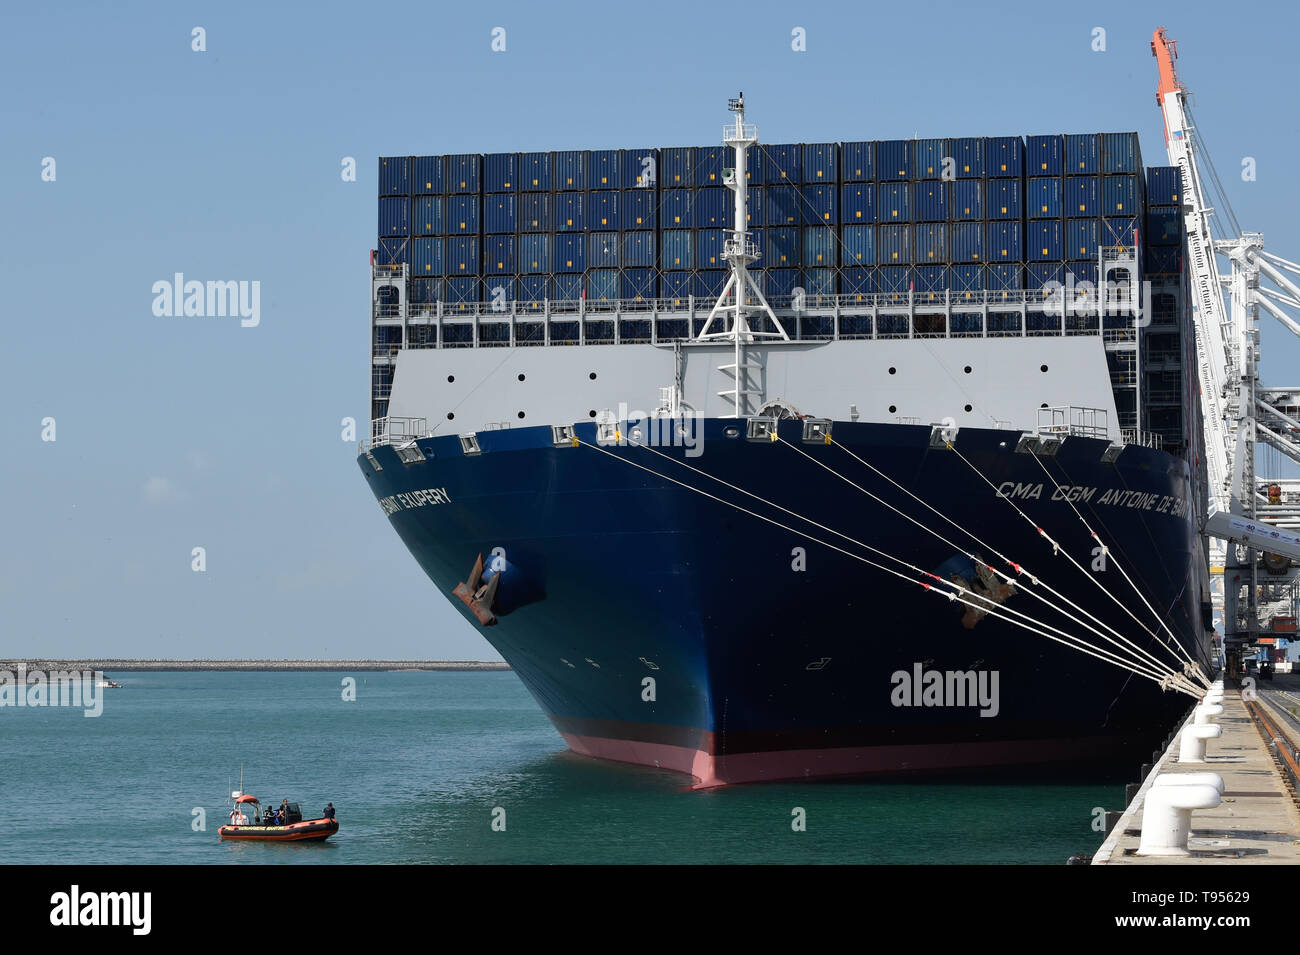 Le Havre (north-western France), on 2018/09/06: inauguration of the CMA CGM Antoine de Saint-Exupery, France’s biggest container ship. Inauguration in Stock Photo